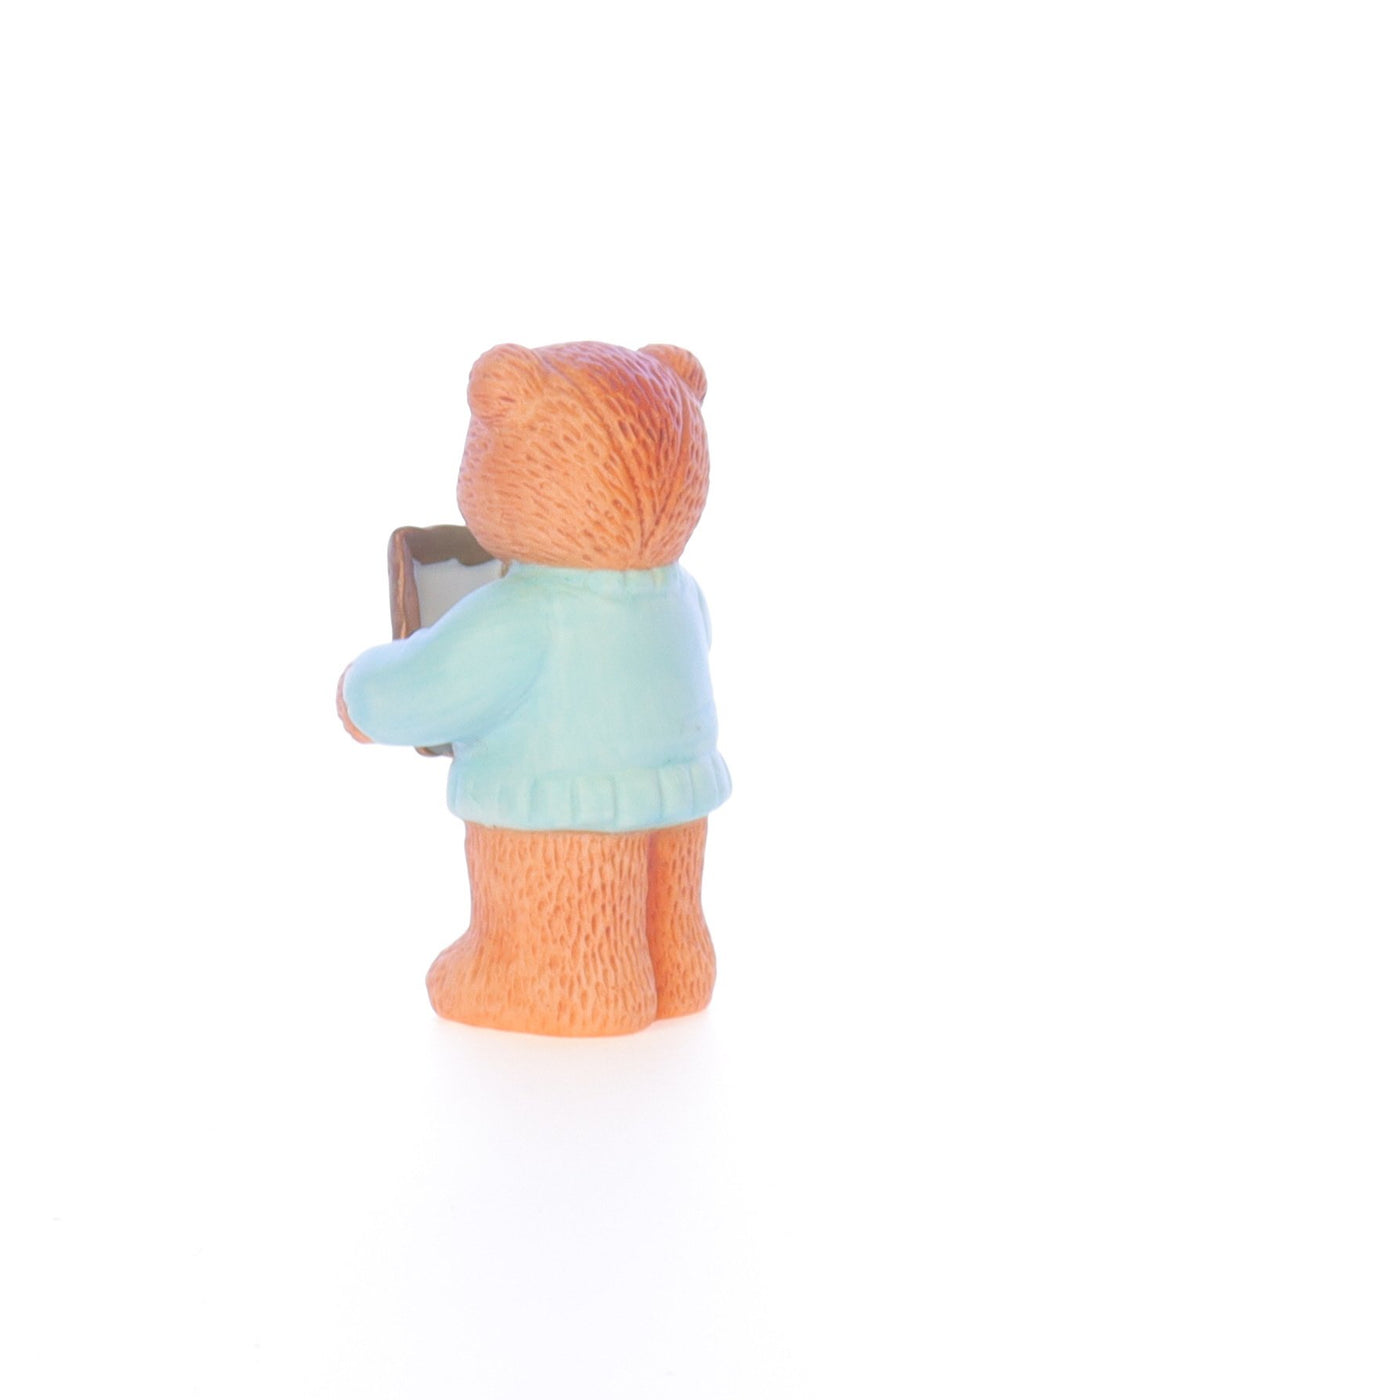 Lucy_And_Me_by_Lucy_Atwell_Porcelain_Figurine_I_Miss_You_Bear_Lucy_Unknown_066_04